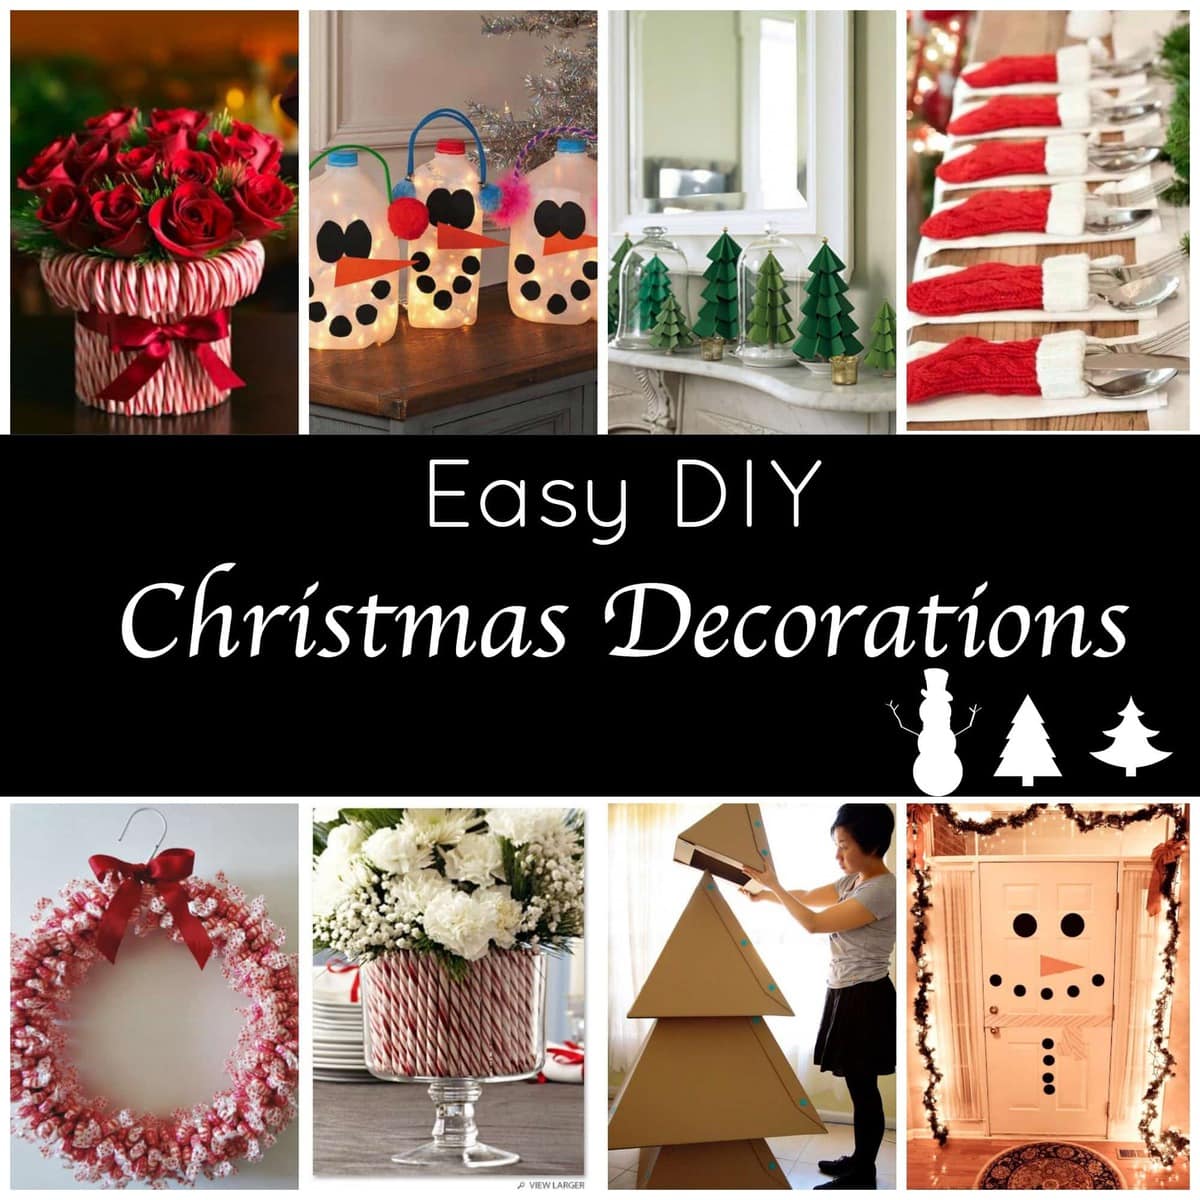 Diy Christmas Decorations For Classroom images